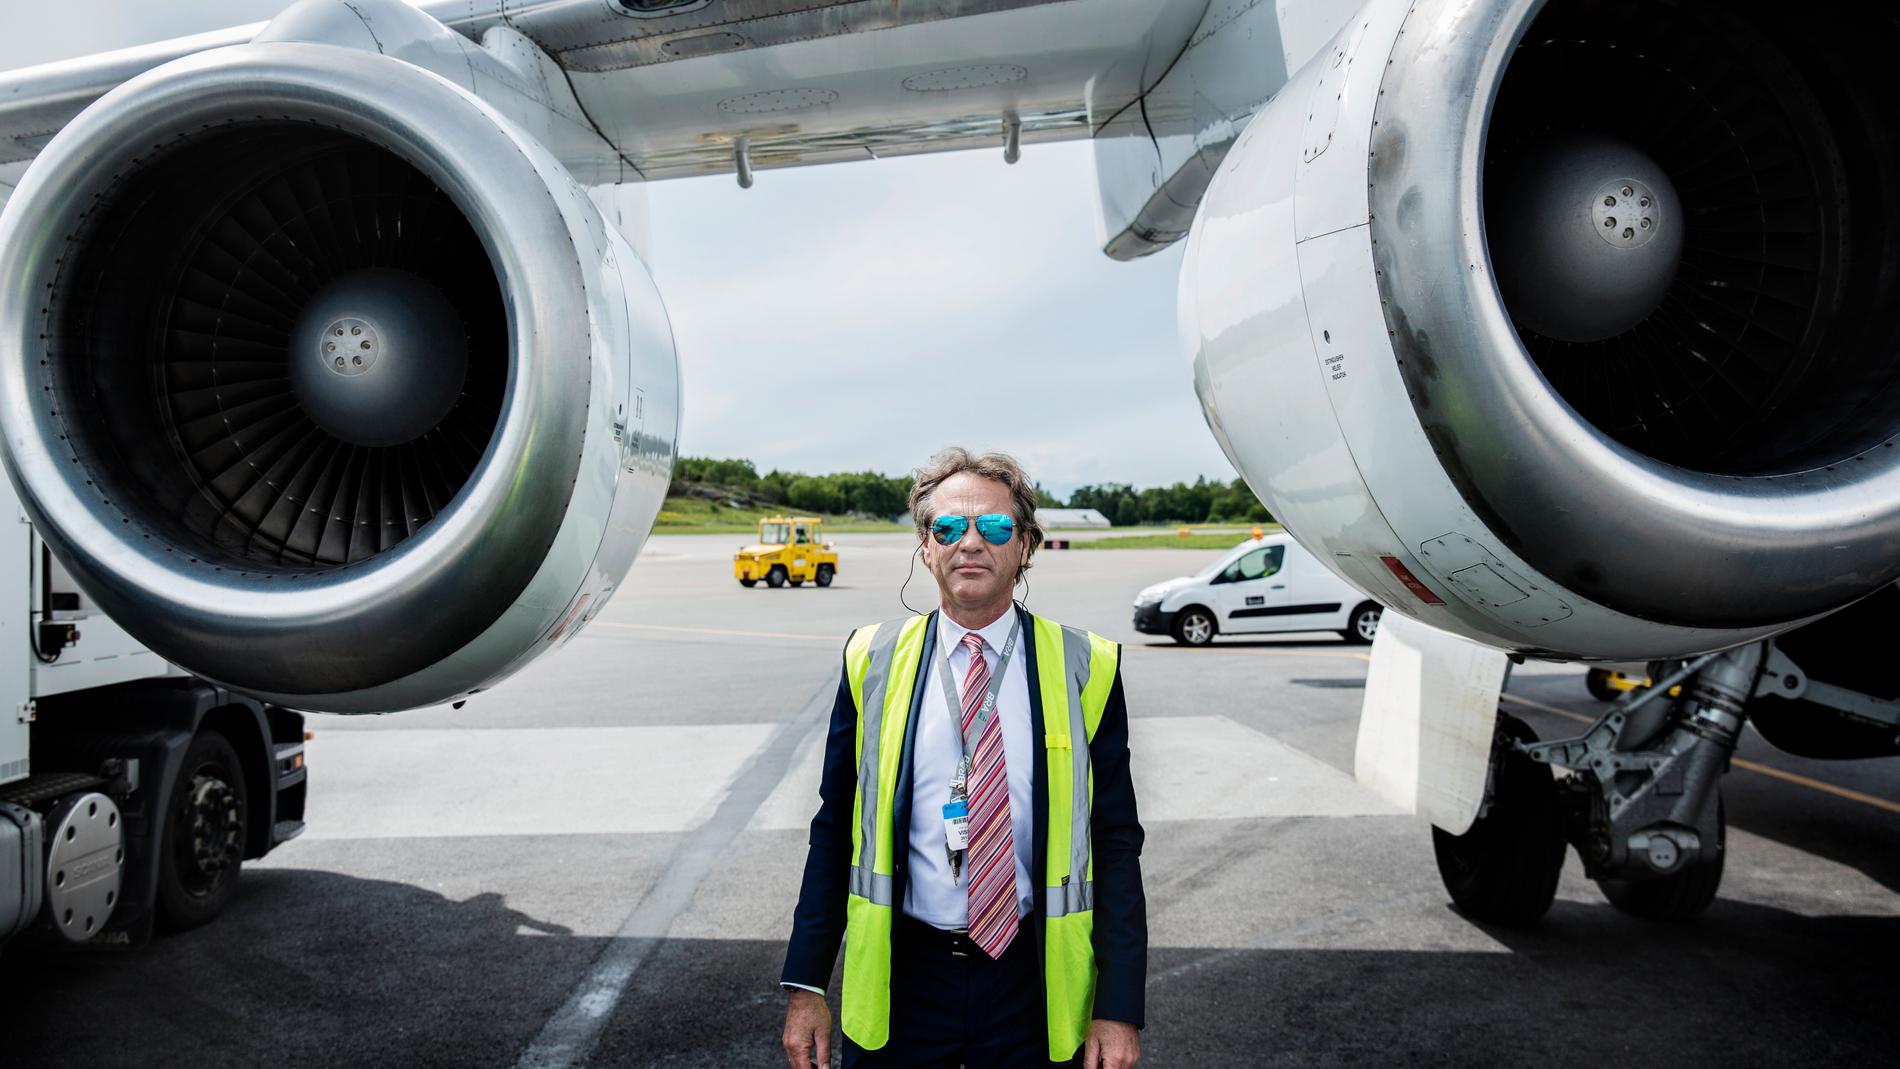 The Importance of Green Travel: Airline Investor Per G. Braathen Advocates for Environmentally Friendly Flying